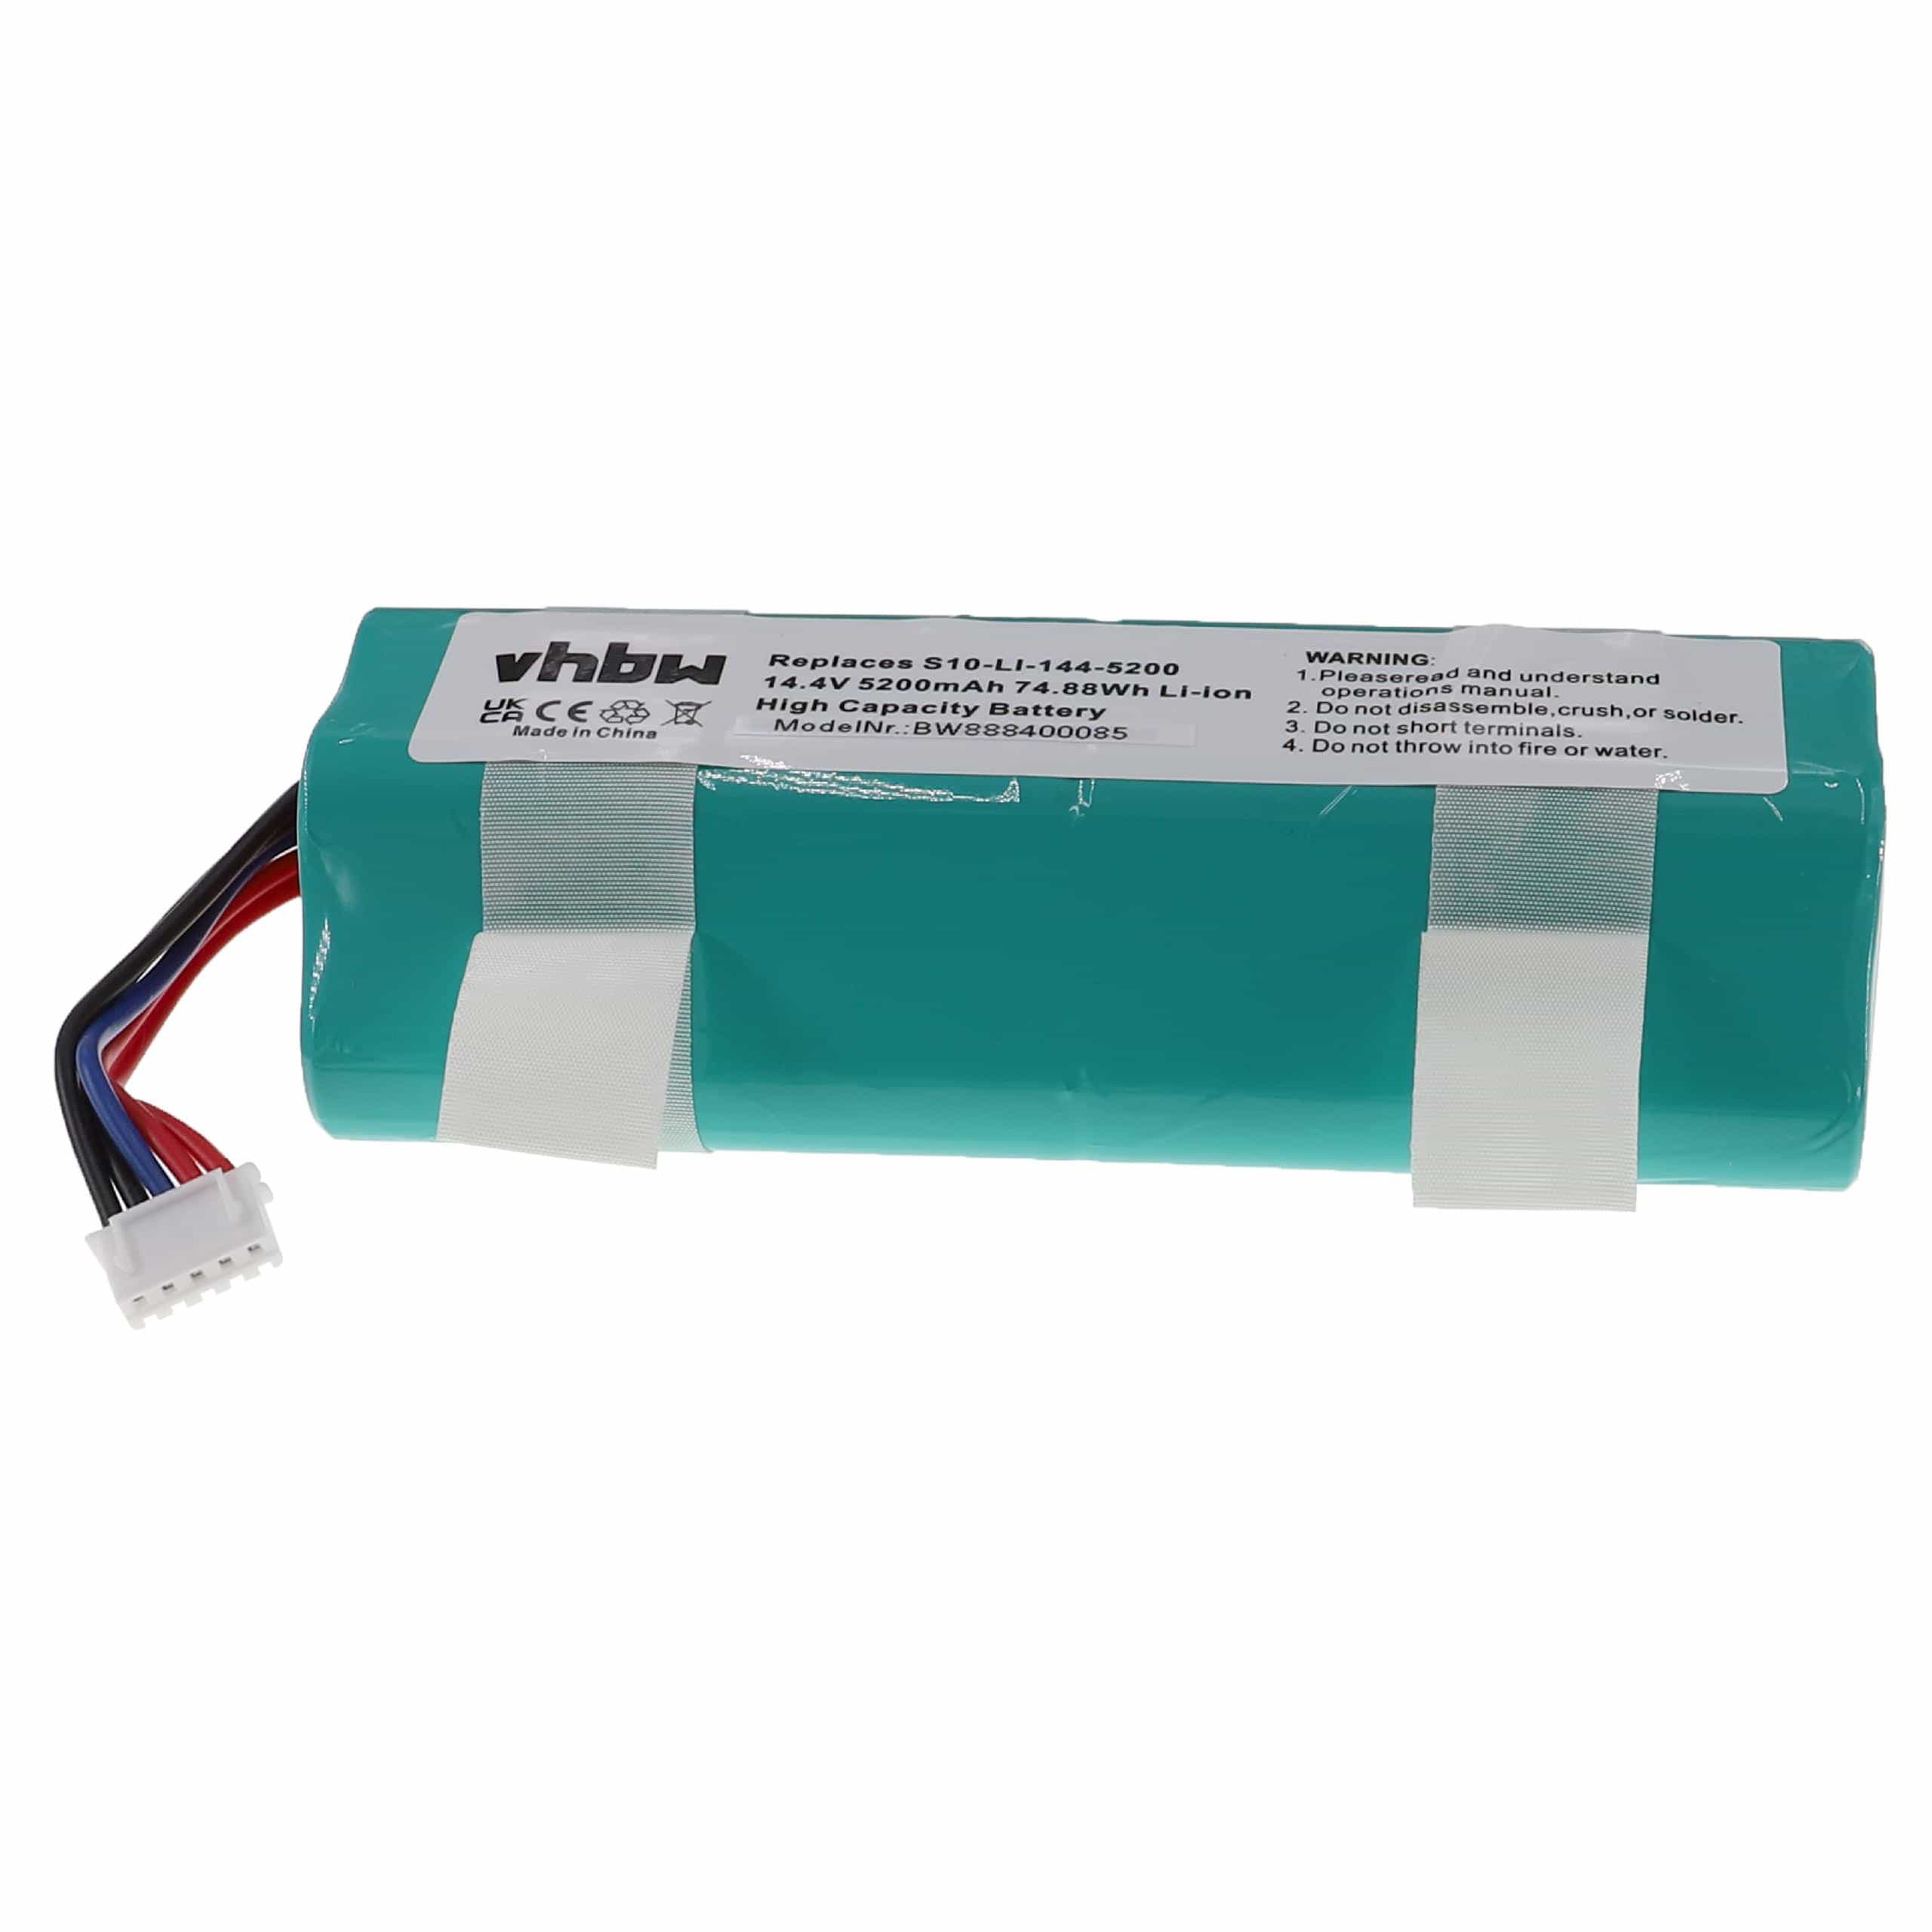 Battery Replacement for Ecovacs 201-1913-4200, 201-1913-4201, S10-Li-144-5200 for - 5200mAh, 14.4V, Li-Ion